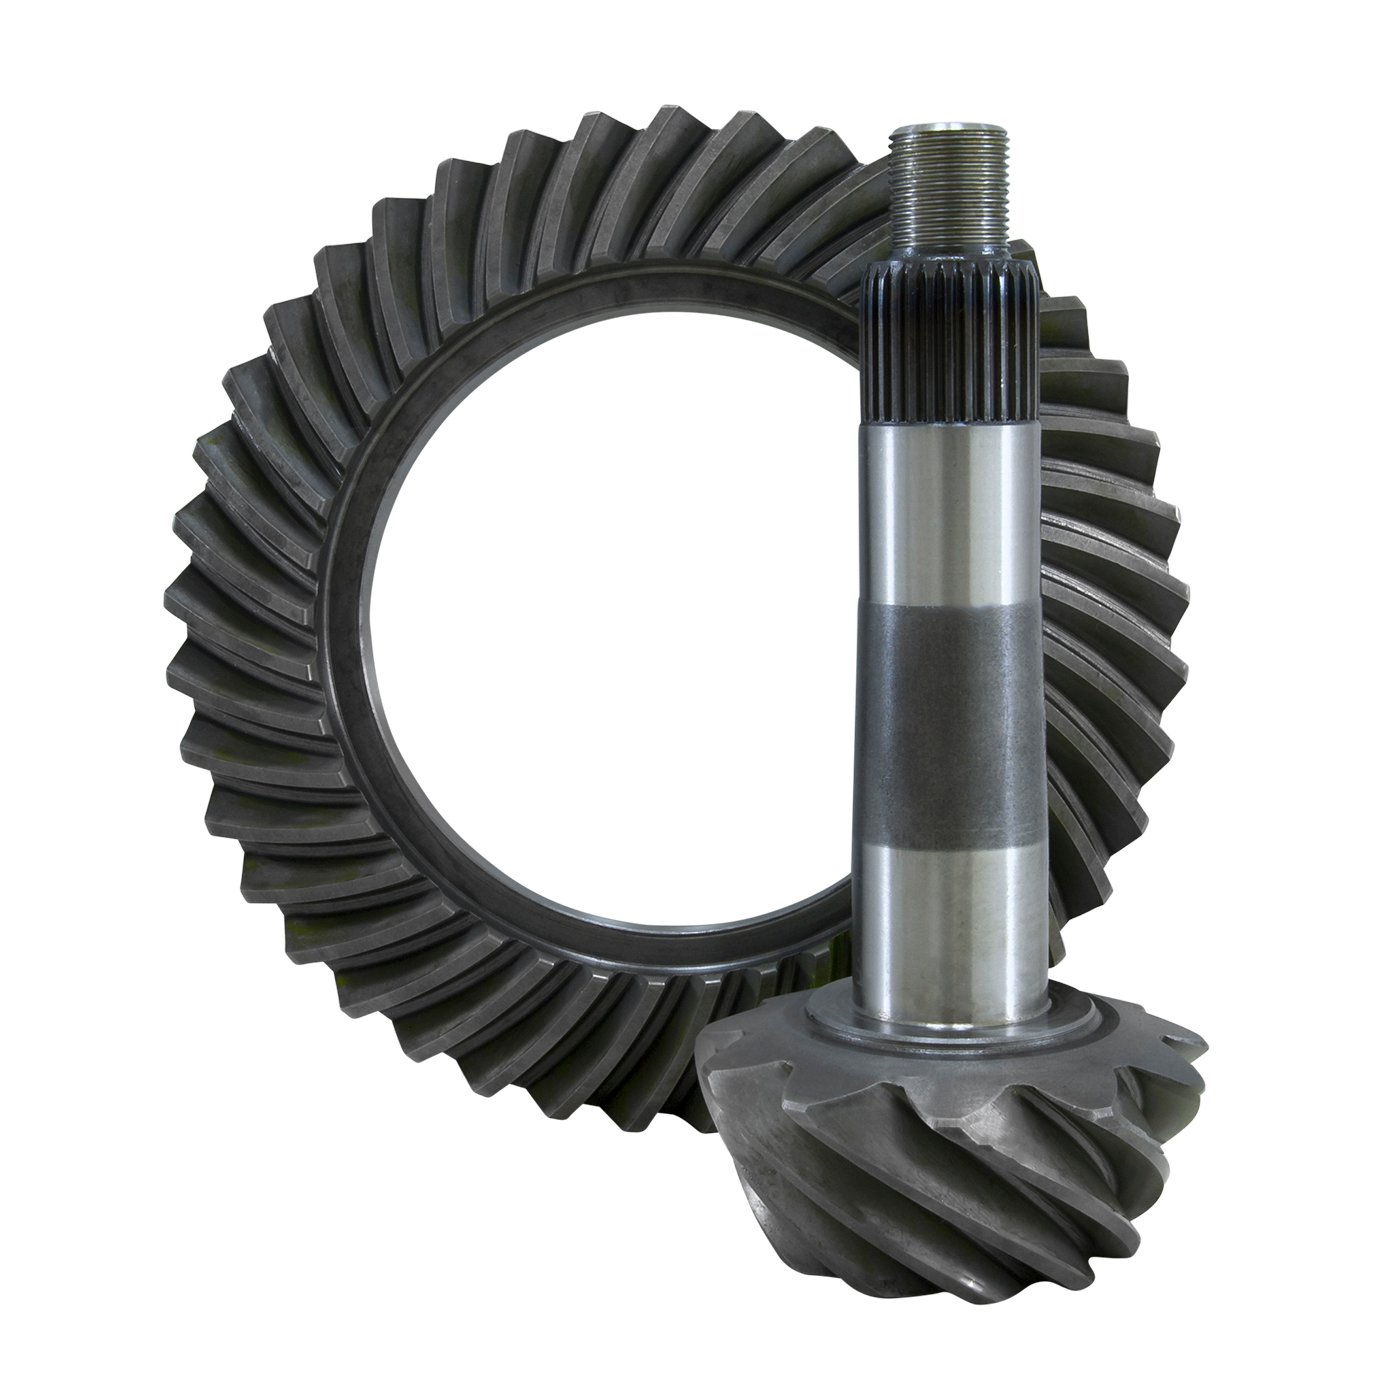 USA Standard 36178 Ring & Pinion in.Thick in. Gear Set, For GM 12 Bolt Truck, 4.11 Ratio